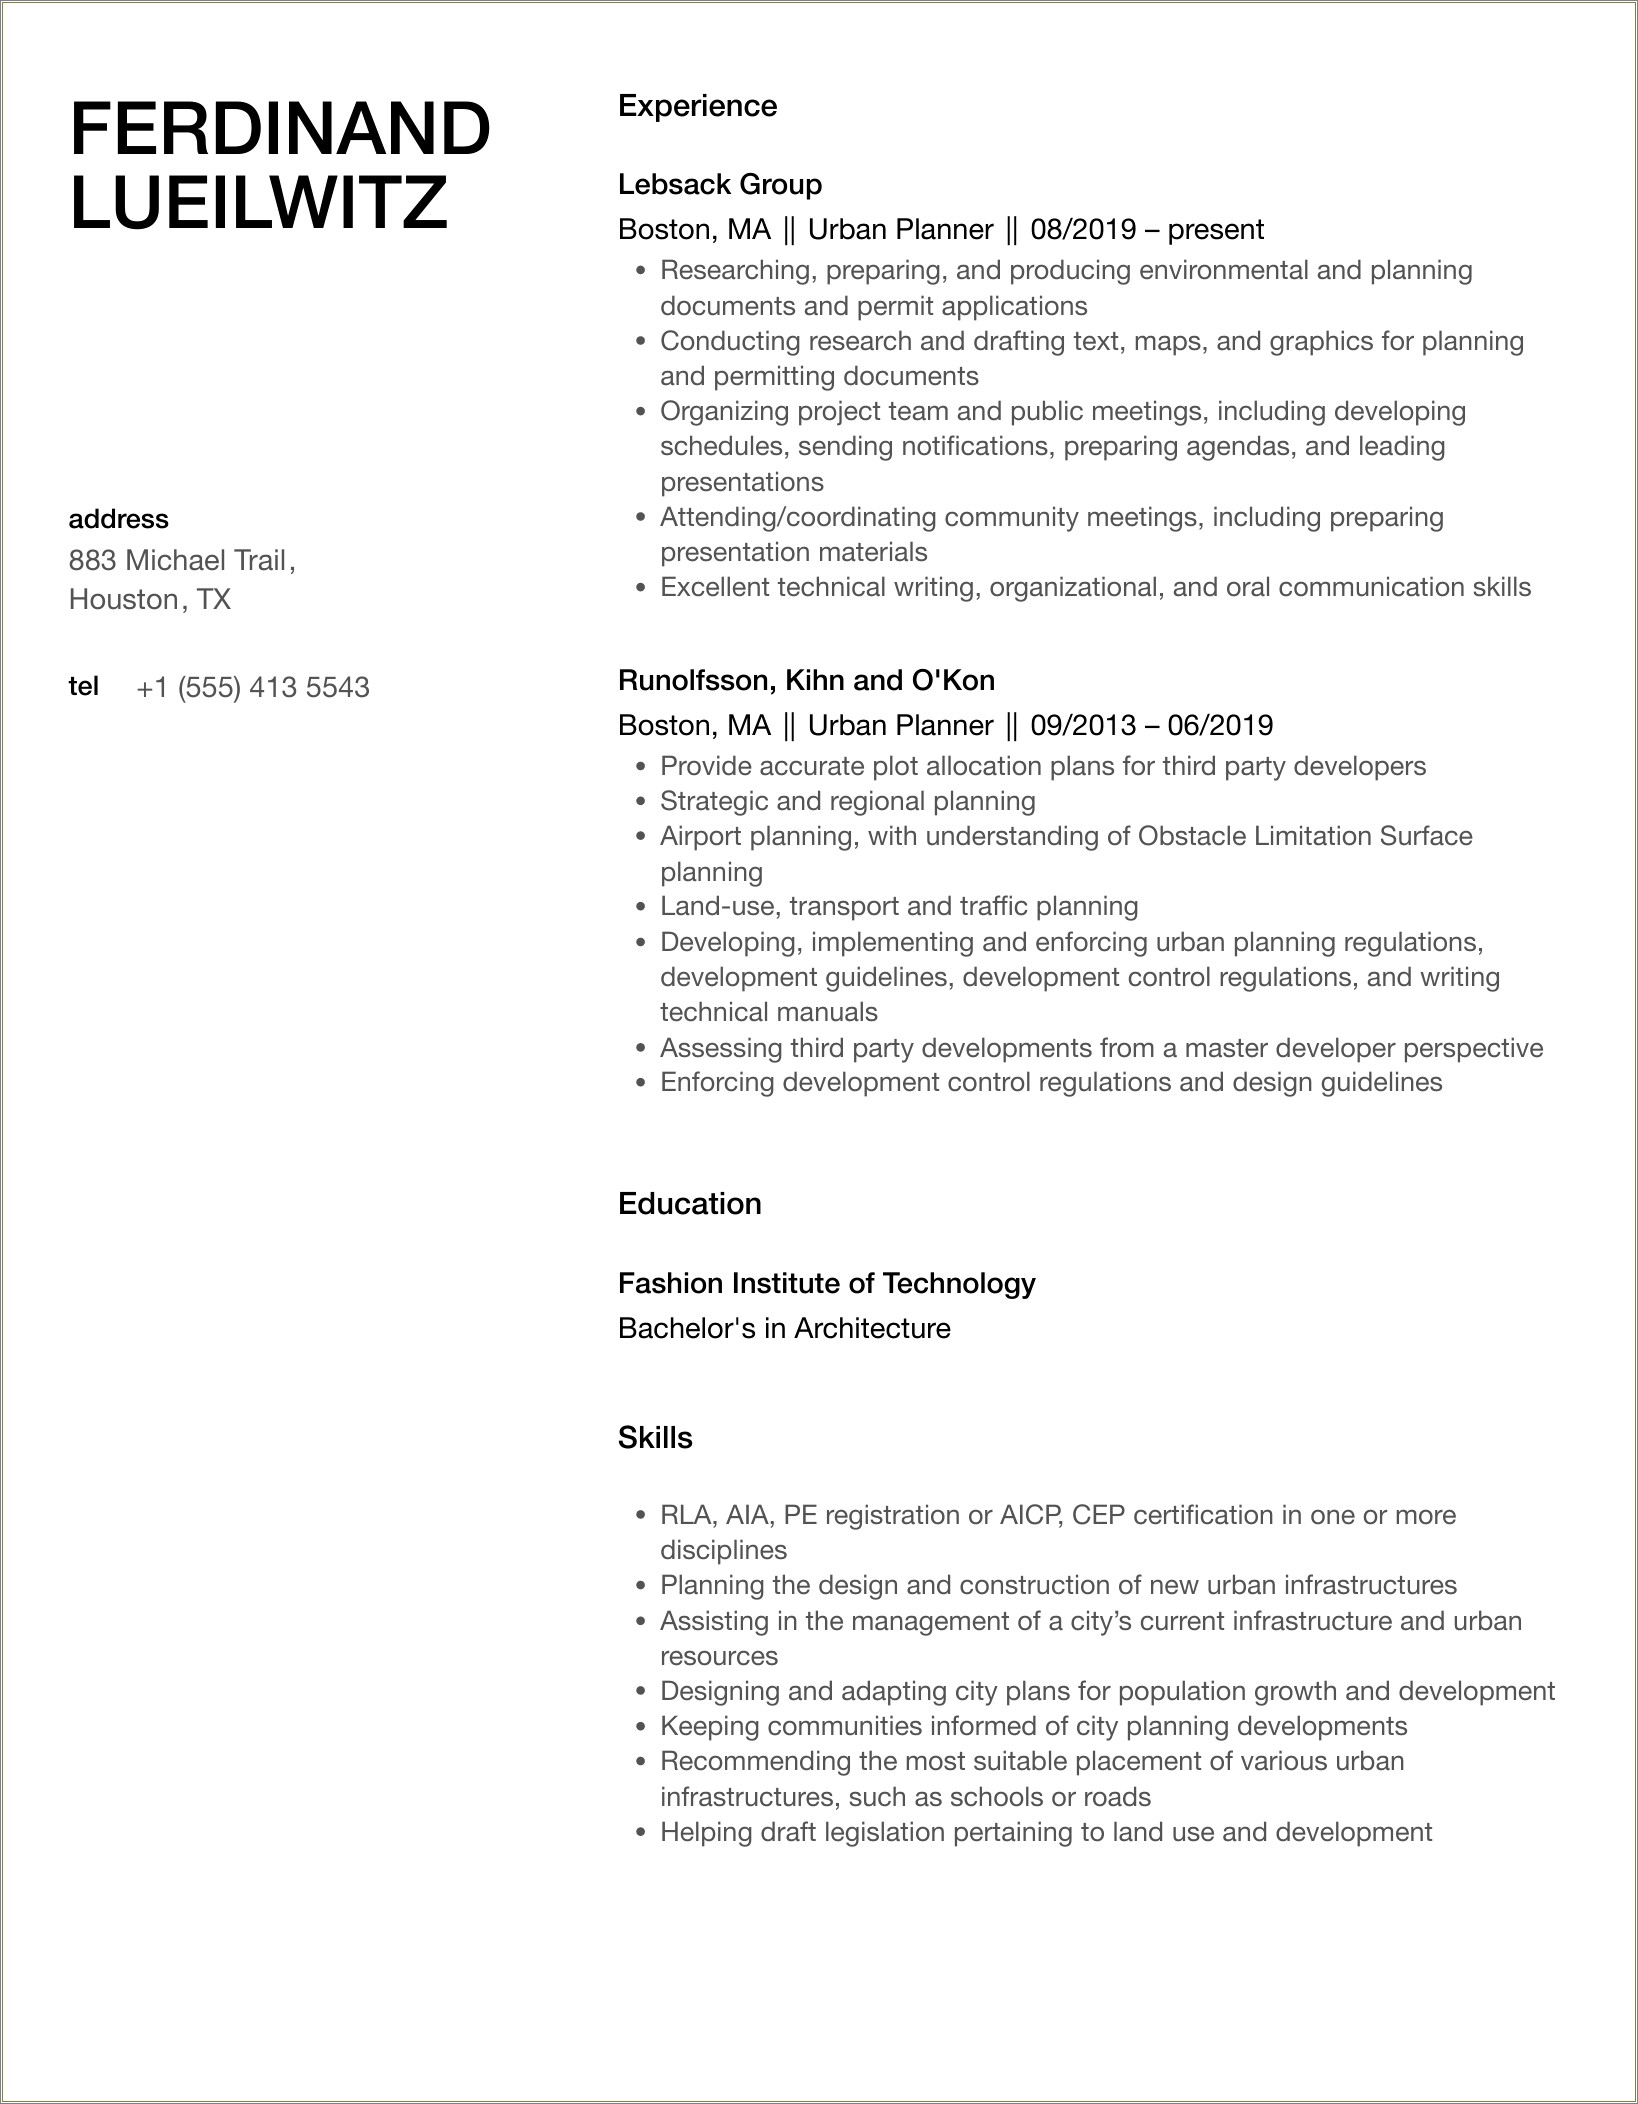 Resume Objective Samples For Urban Planning